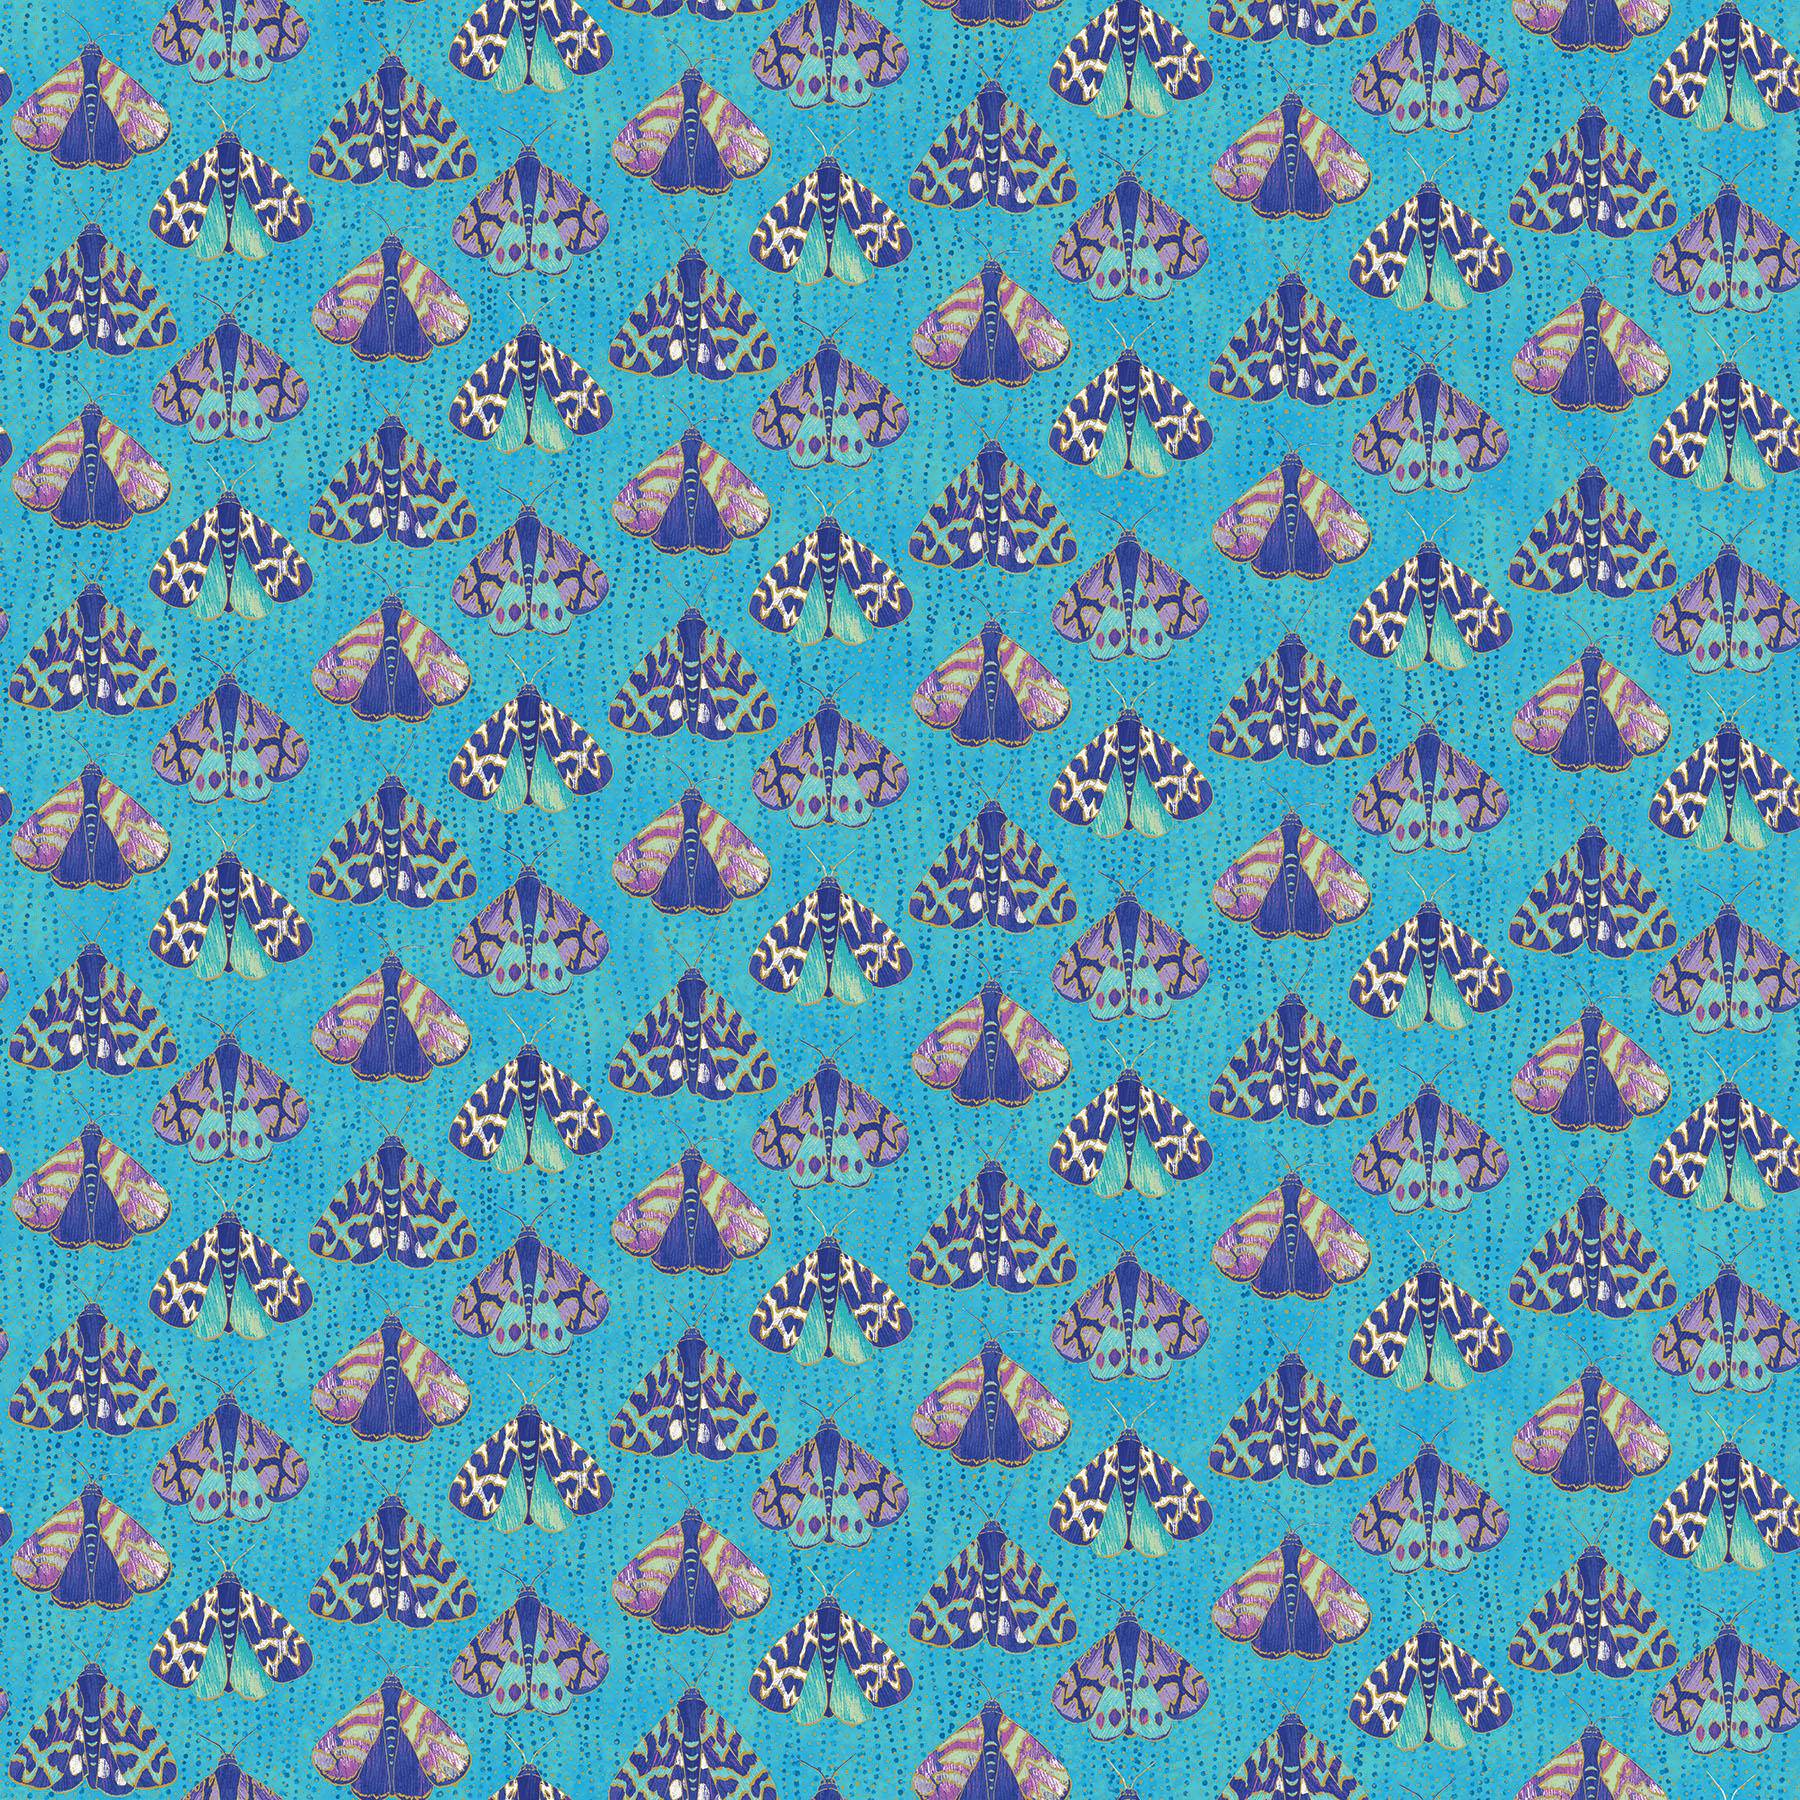 Noctural Bliss Fantasia Cotton Fabric Moths by Northcott 22958M-63